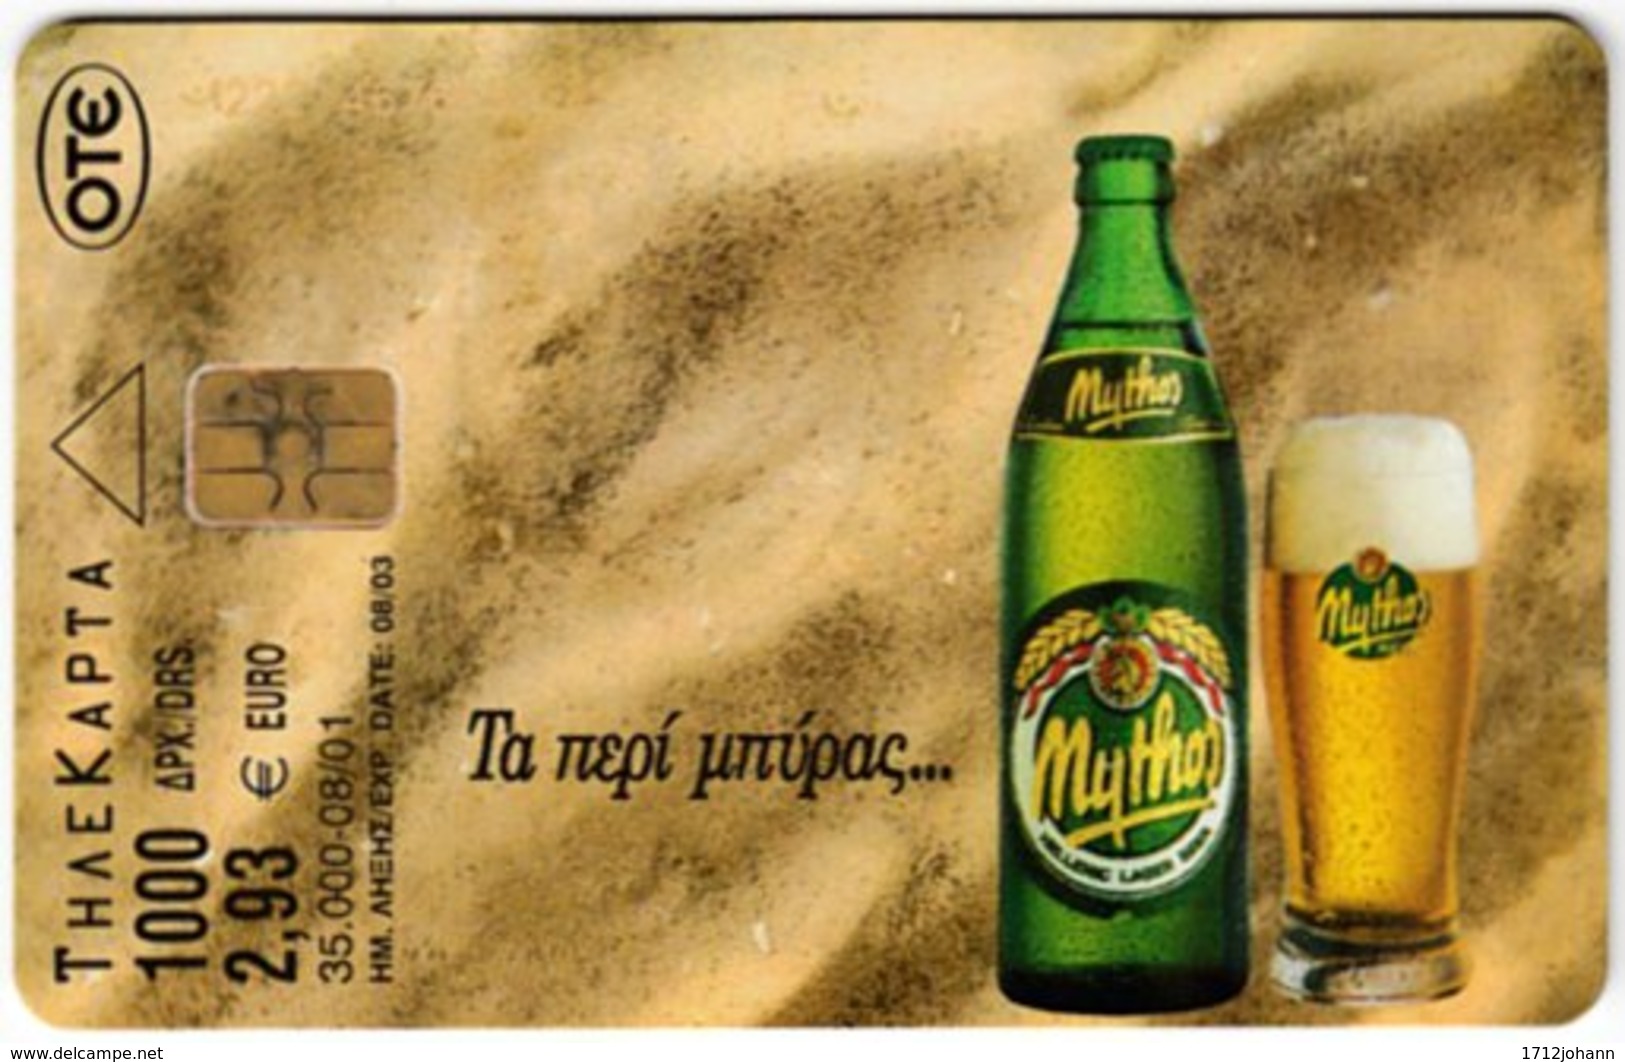 GREECE F-729 Chip OTE - Advertising, Drink, Beer - Used - Griechenland